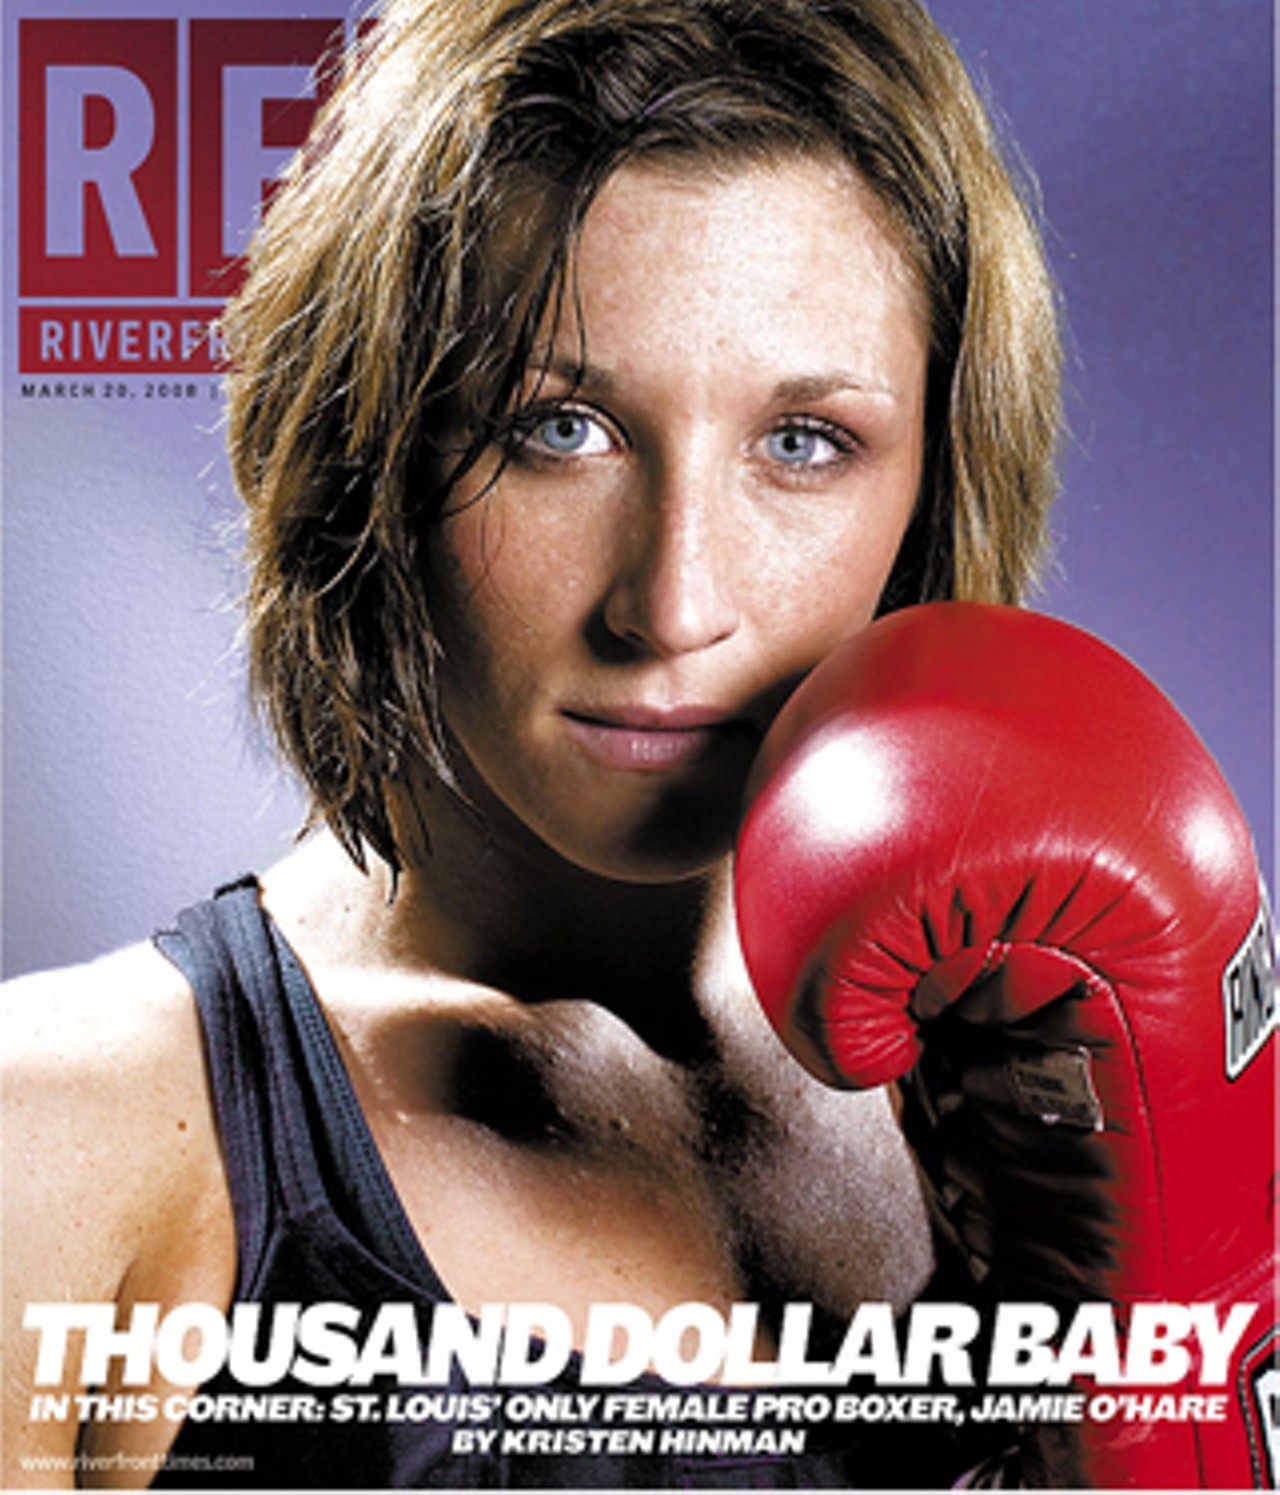 Thousand Dollar Baby: By day Jamie O'Hare studies for a master's in social work. Her night job is anything but. By Kristen Hinman. March 20.